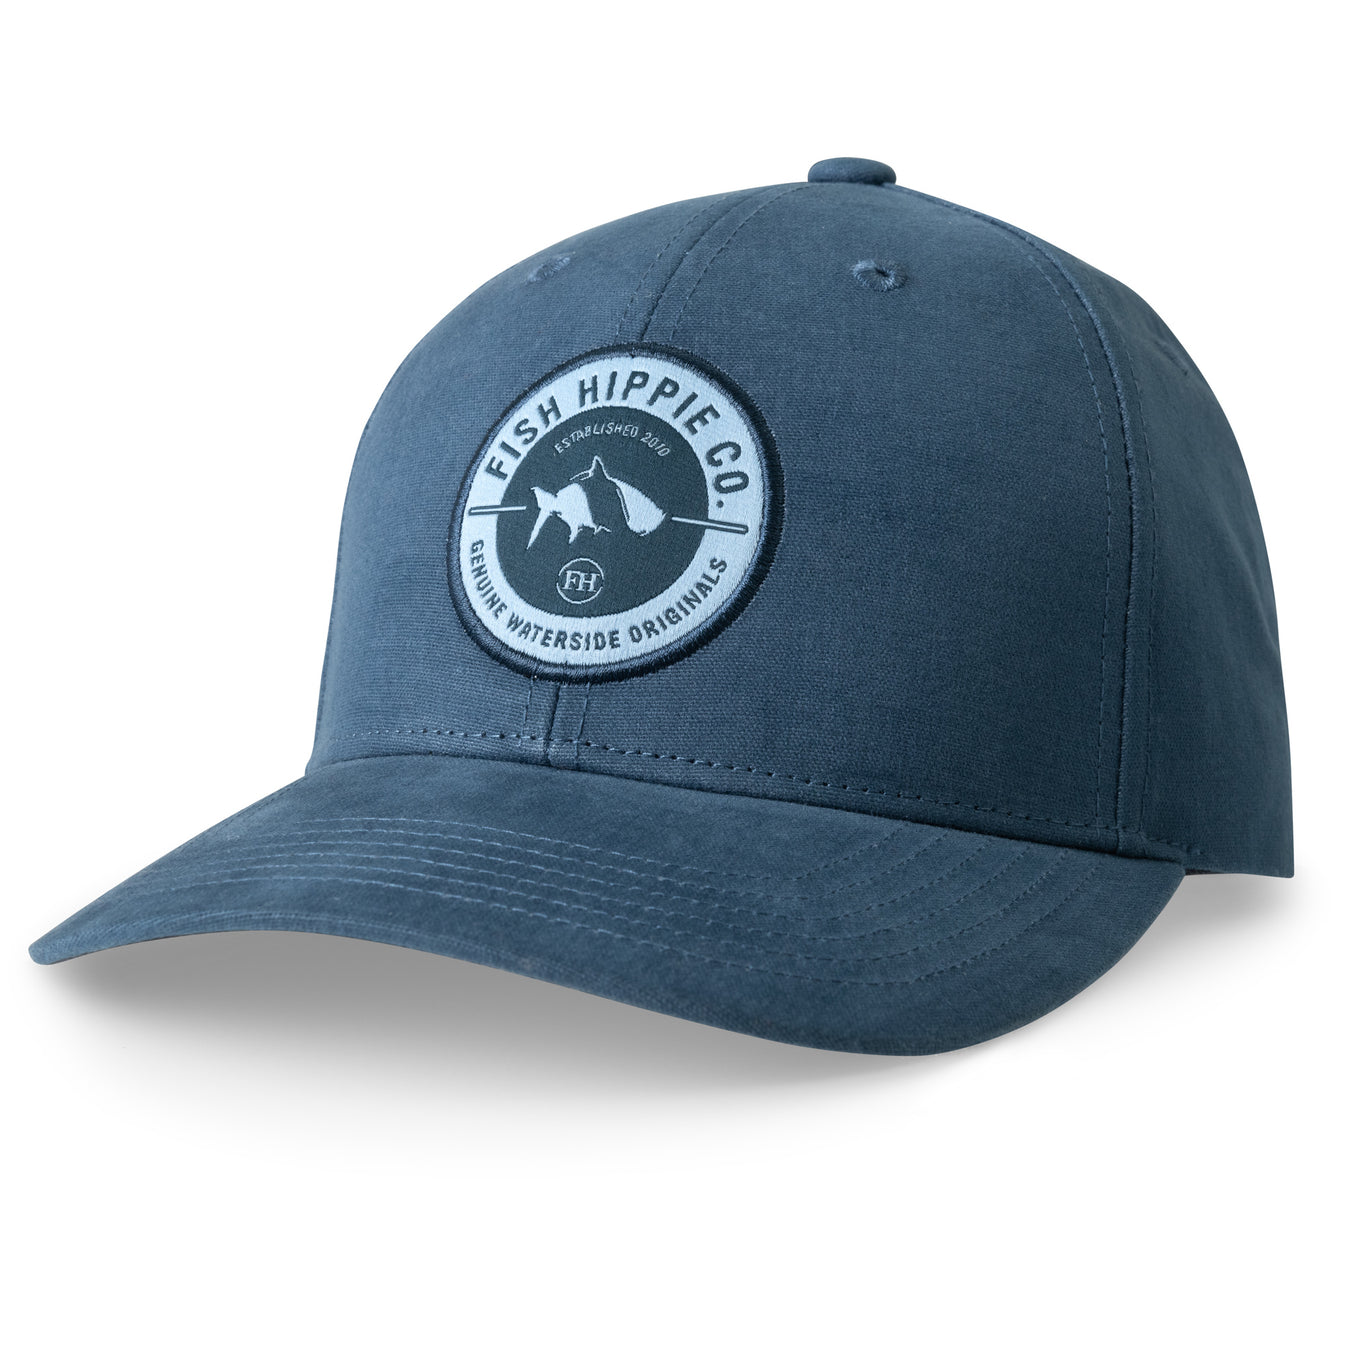 FH Drifter Structured Hat